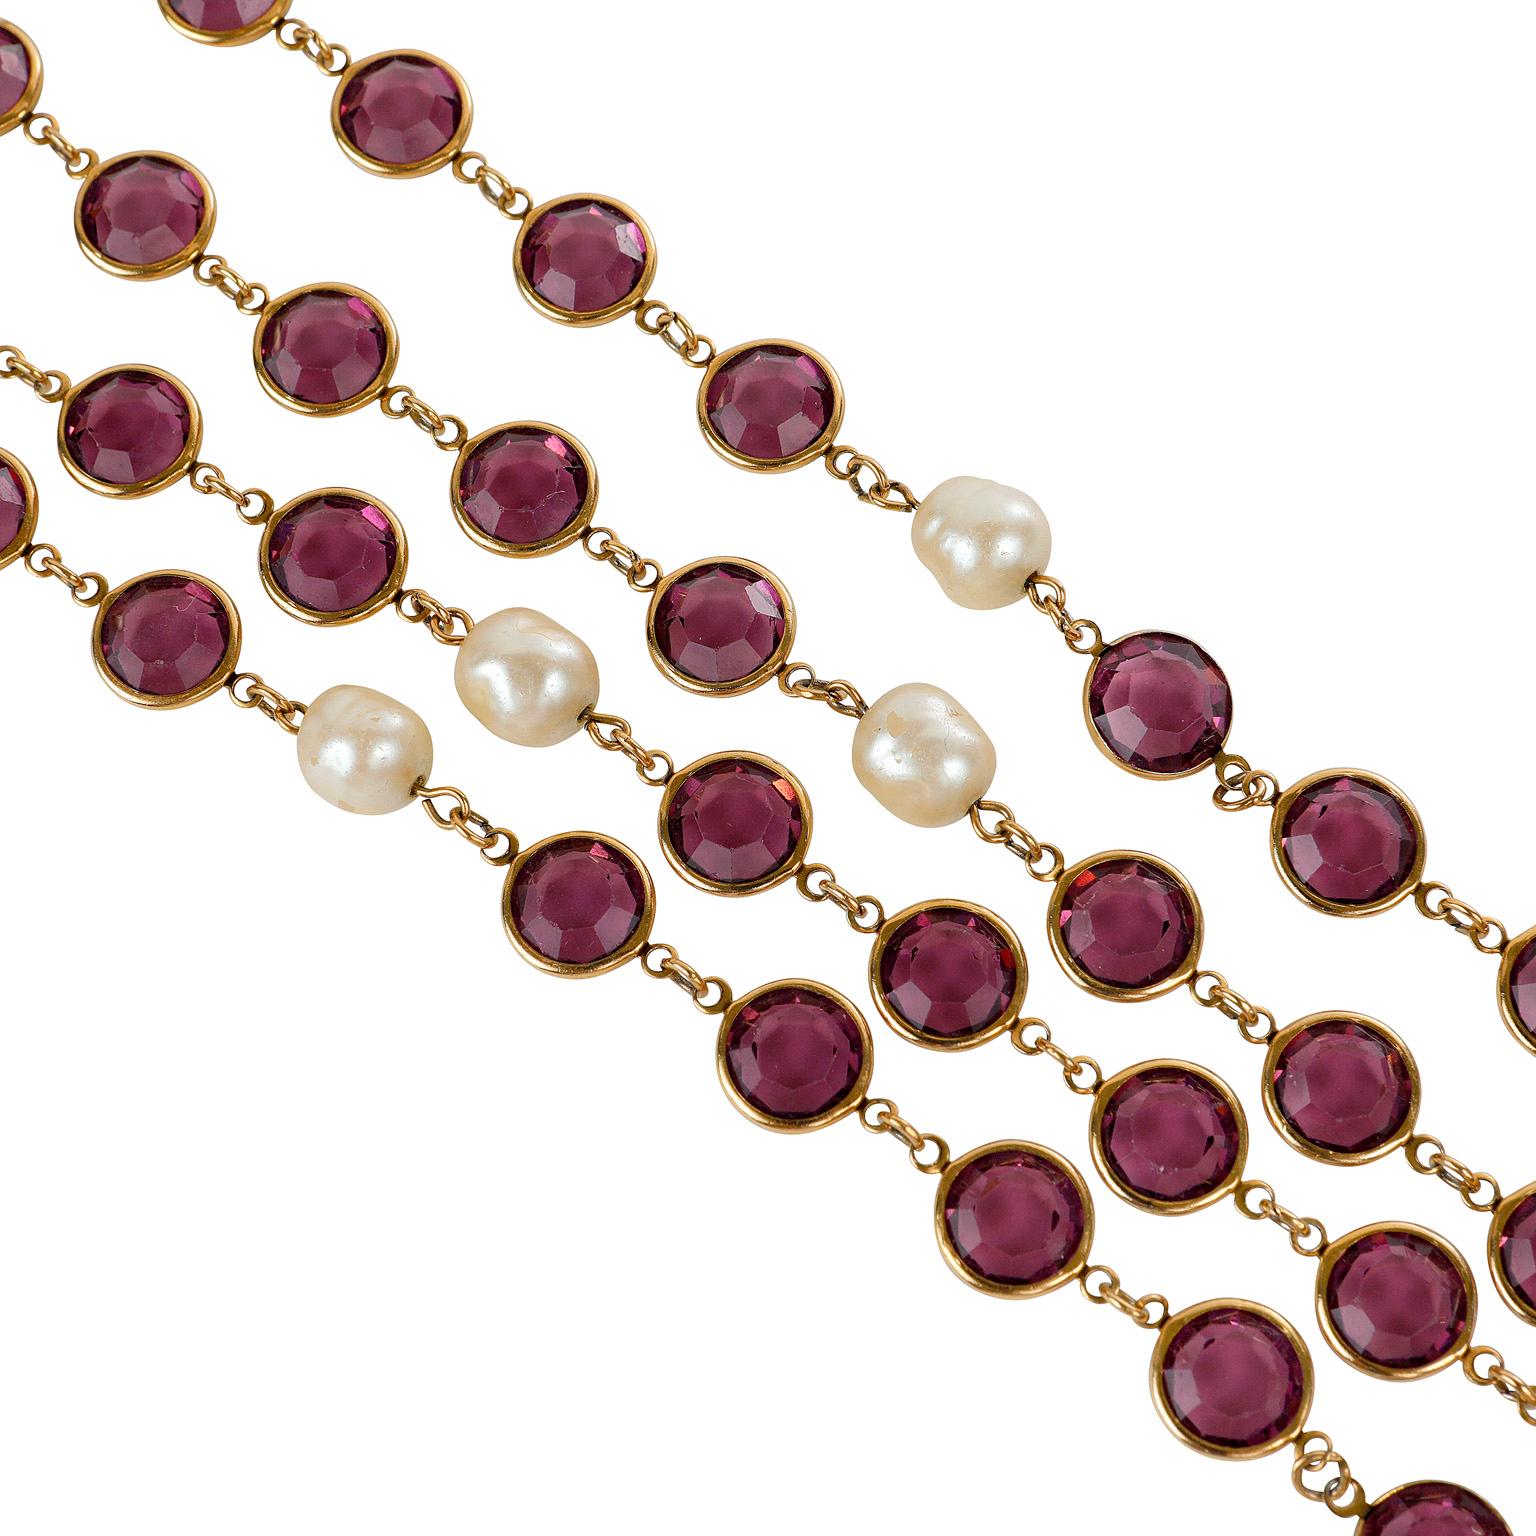 Women's Chanel Vintage Pearl and Purple Crystal Satoir Necklace For Sale